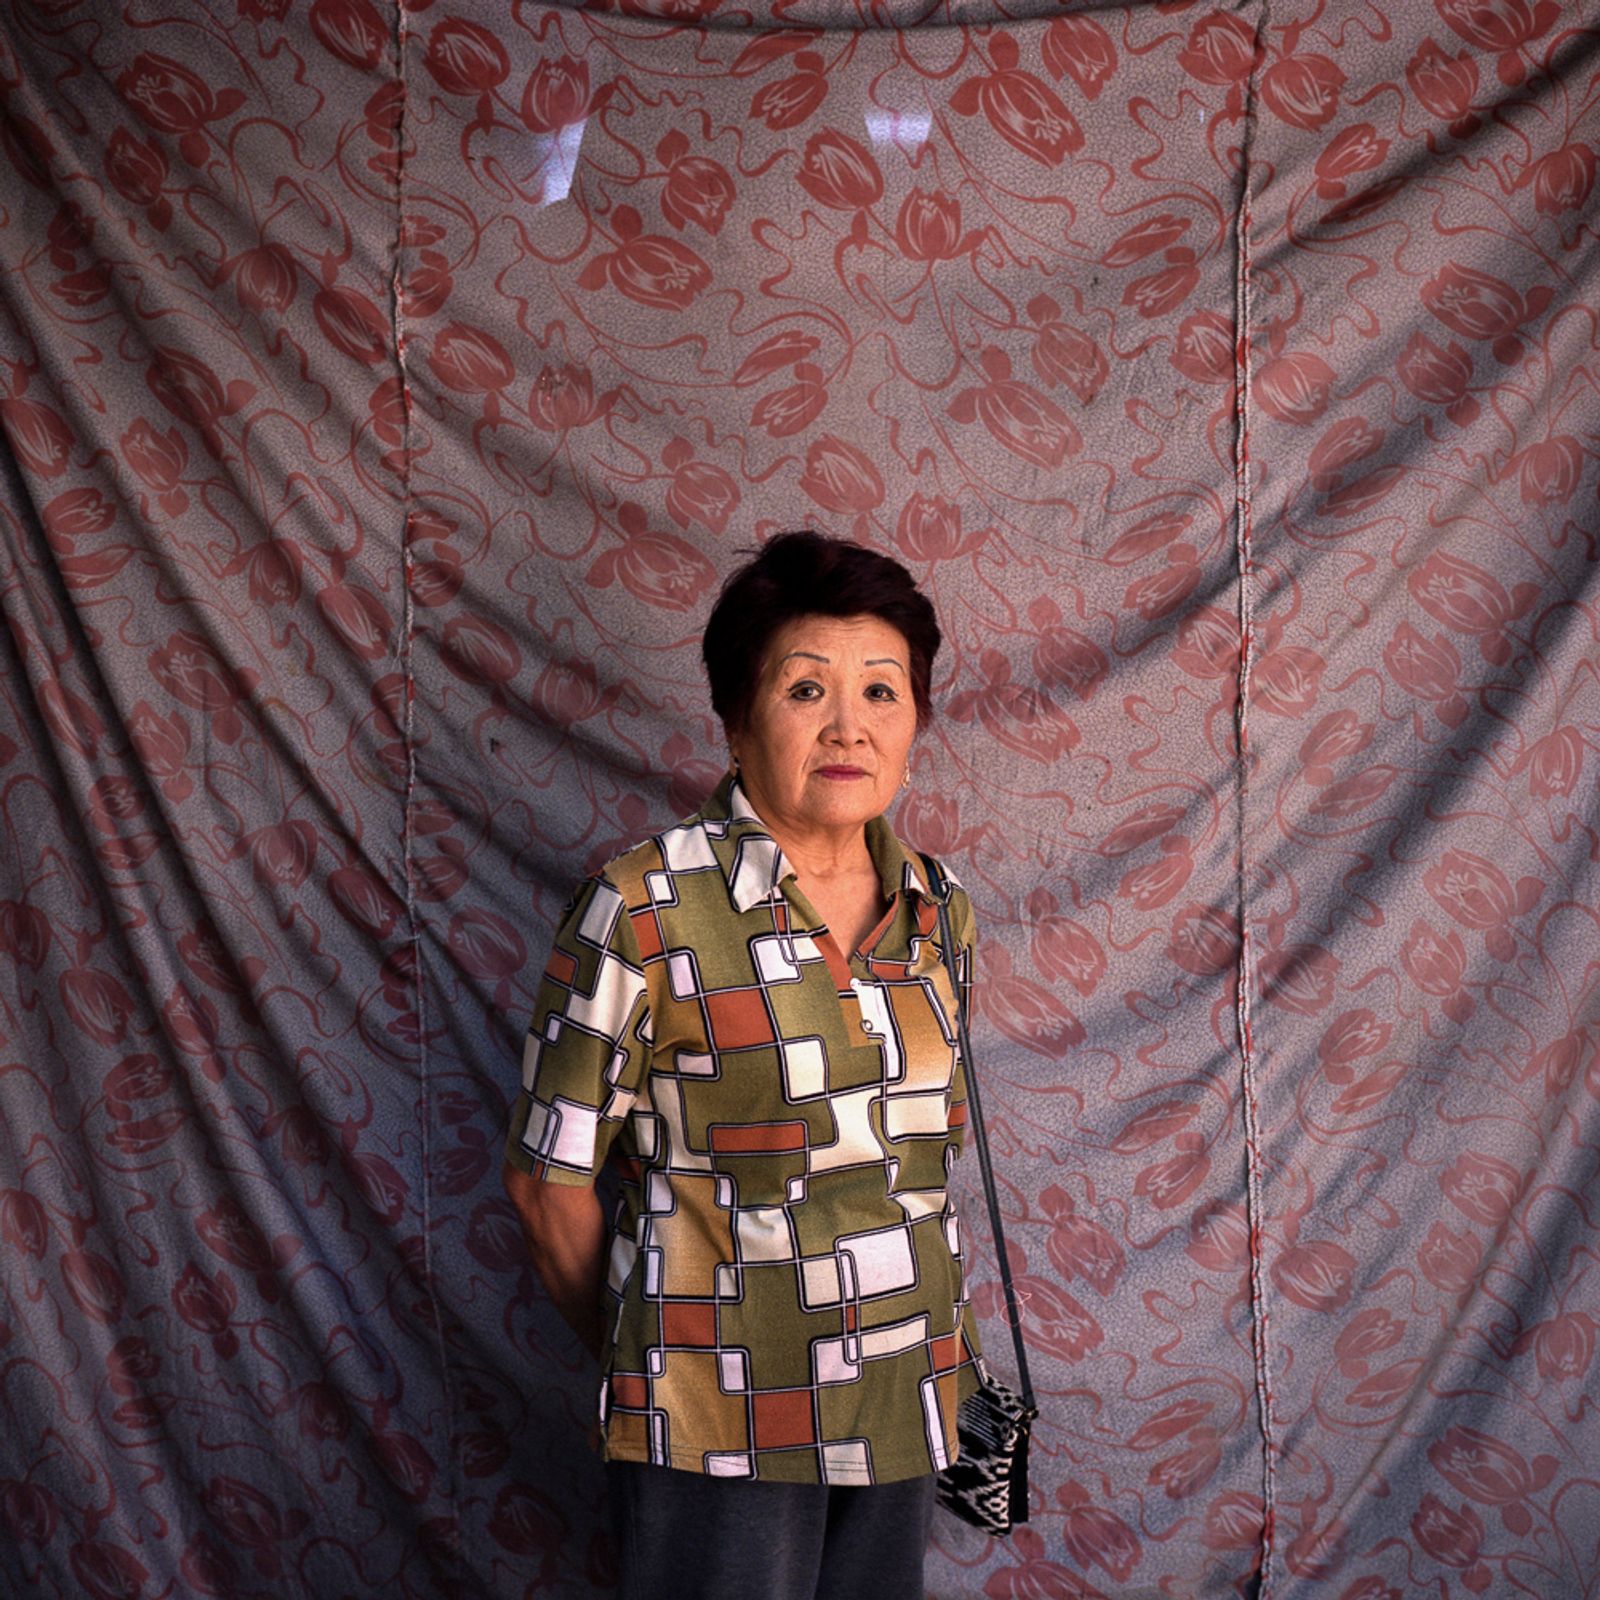 © Michael Vince Kim - Image from the The Koreans of Kazakhstan photography project